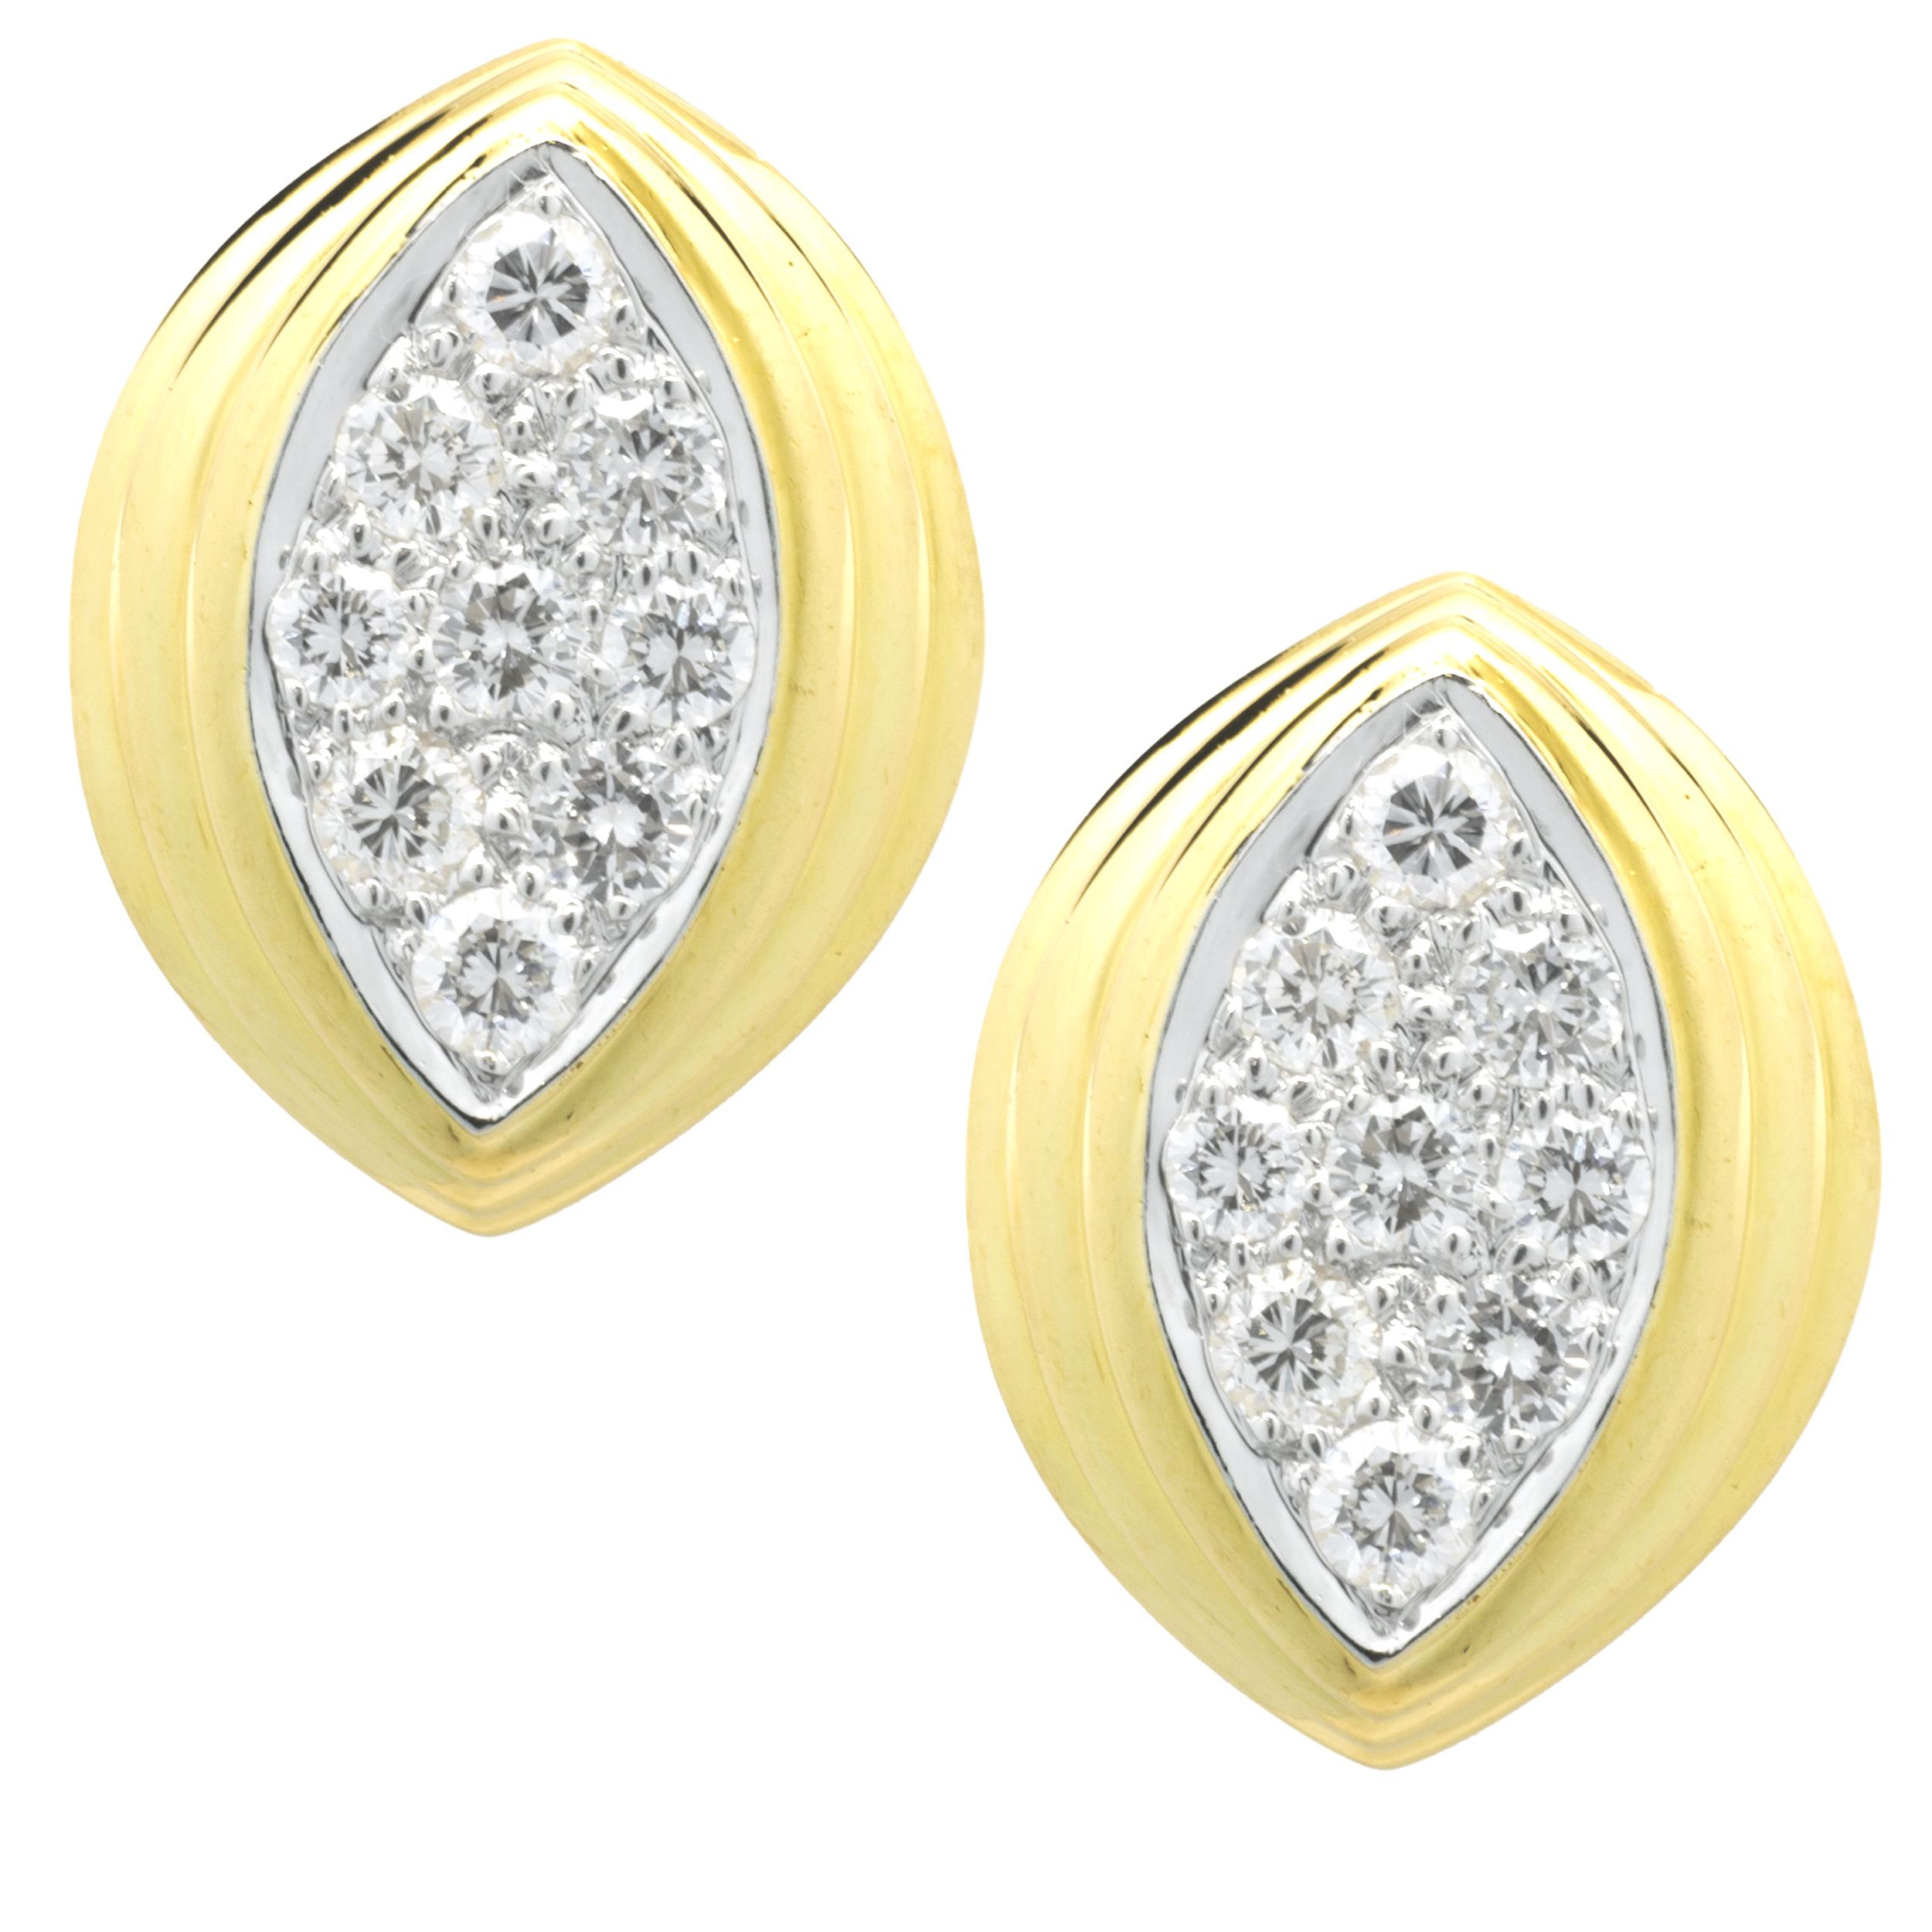 Designer: custom design
Material: 14K yellow gold
Diamonds: 18 round brilliant cut = 1.08cttw
Color: G
Clarity: SI1
Dimensions: earrings measure 19.3 X 14.75mm 
Fastenings: post with omega backs
Weight: 9.48 grams

